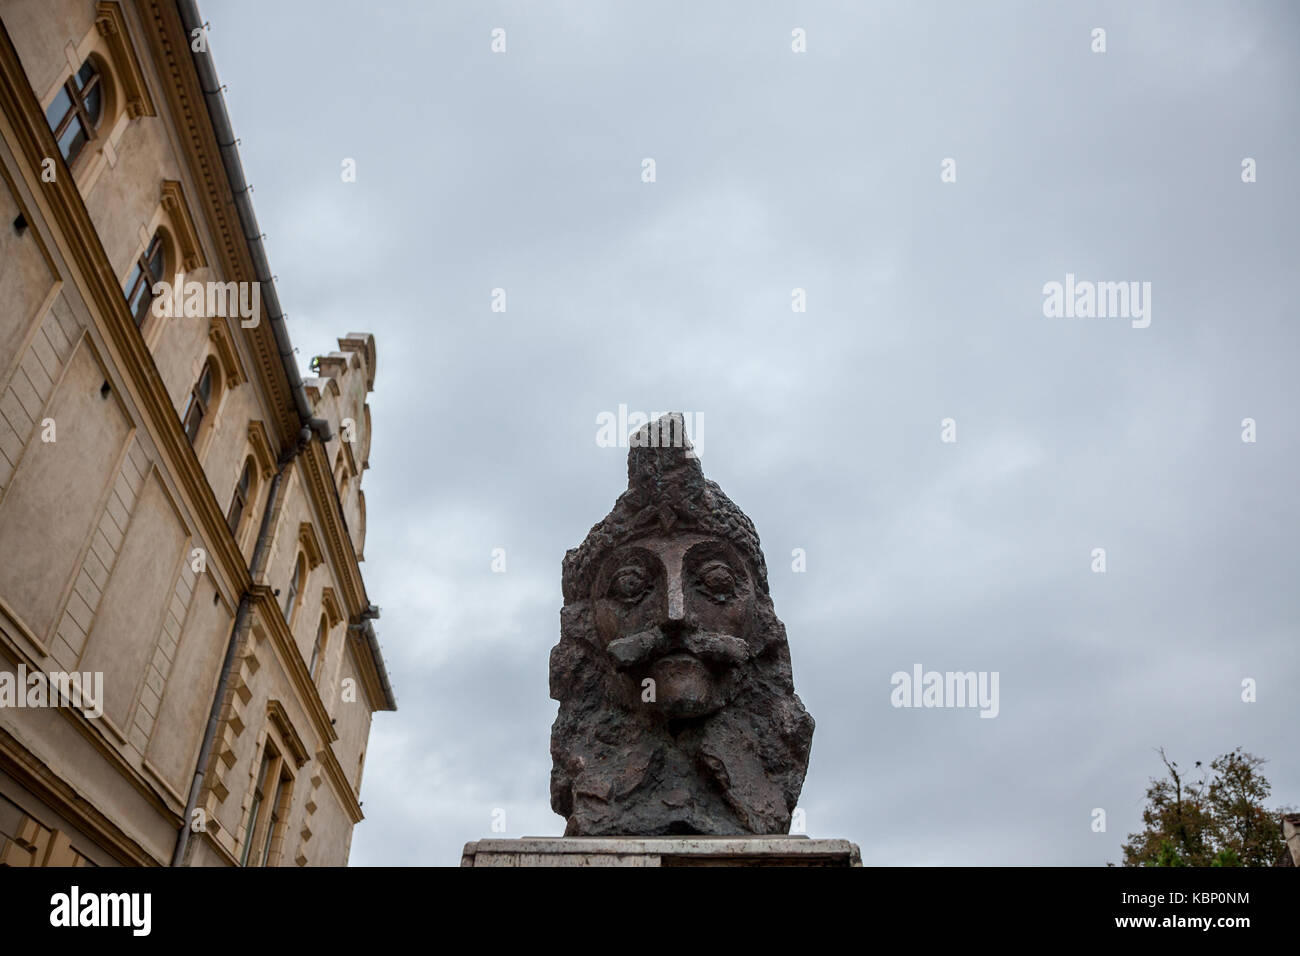 SIGHISOARA, ROMANIA - SEPTEMBER 22, 2017: Statue of Vlad Tepes, aka Vlad Dracul or Dracula in the citadel of Sighisoara, where he was allegedly born i Stock Photo